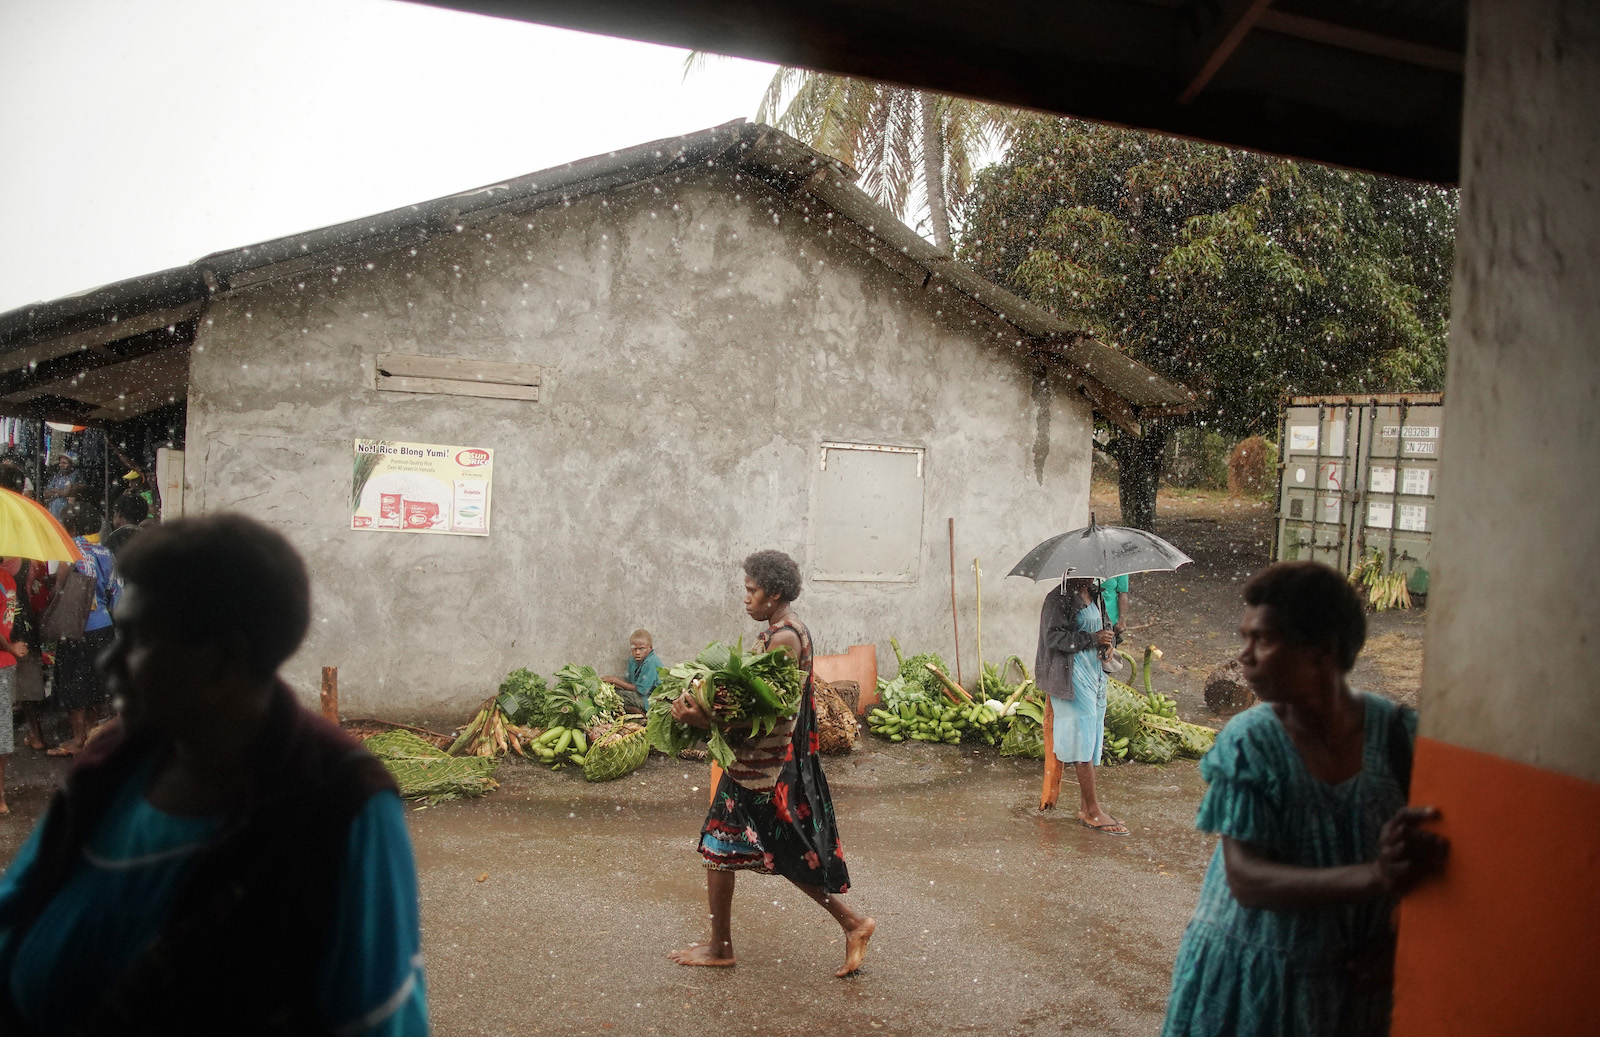 a woman walks by while people gather under an awning in the rain